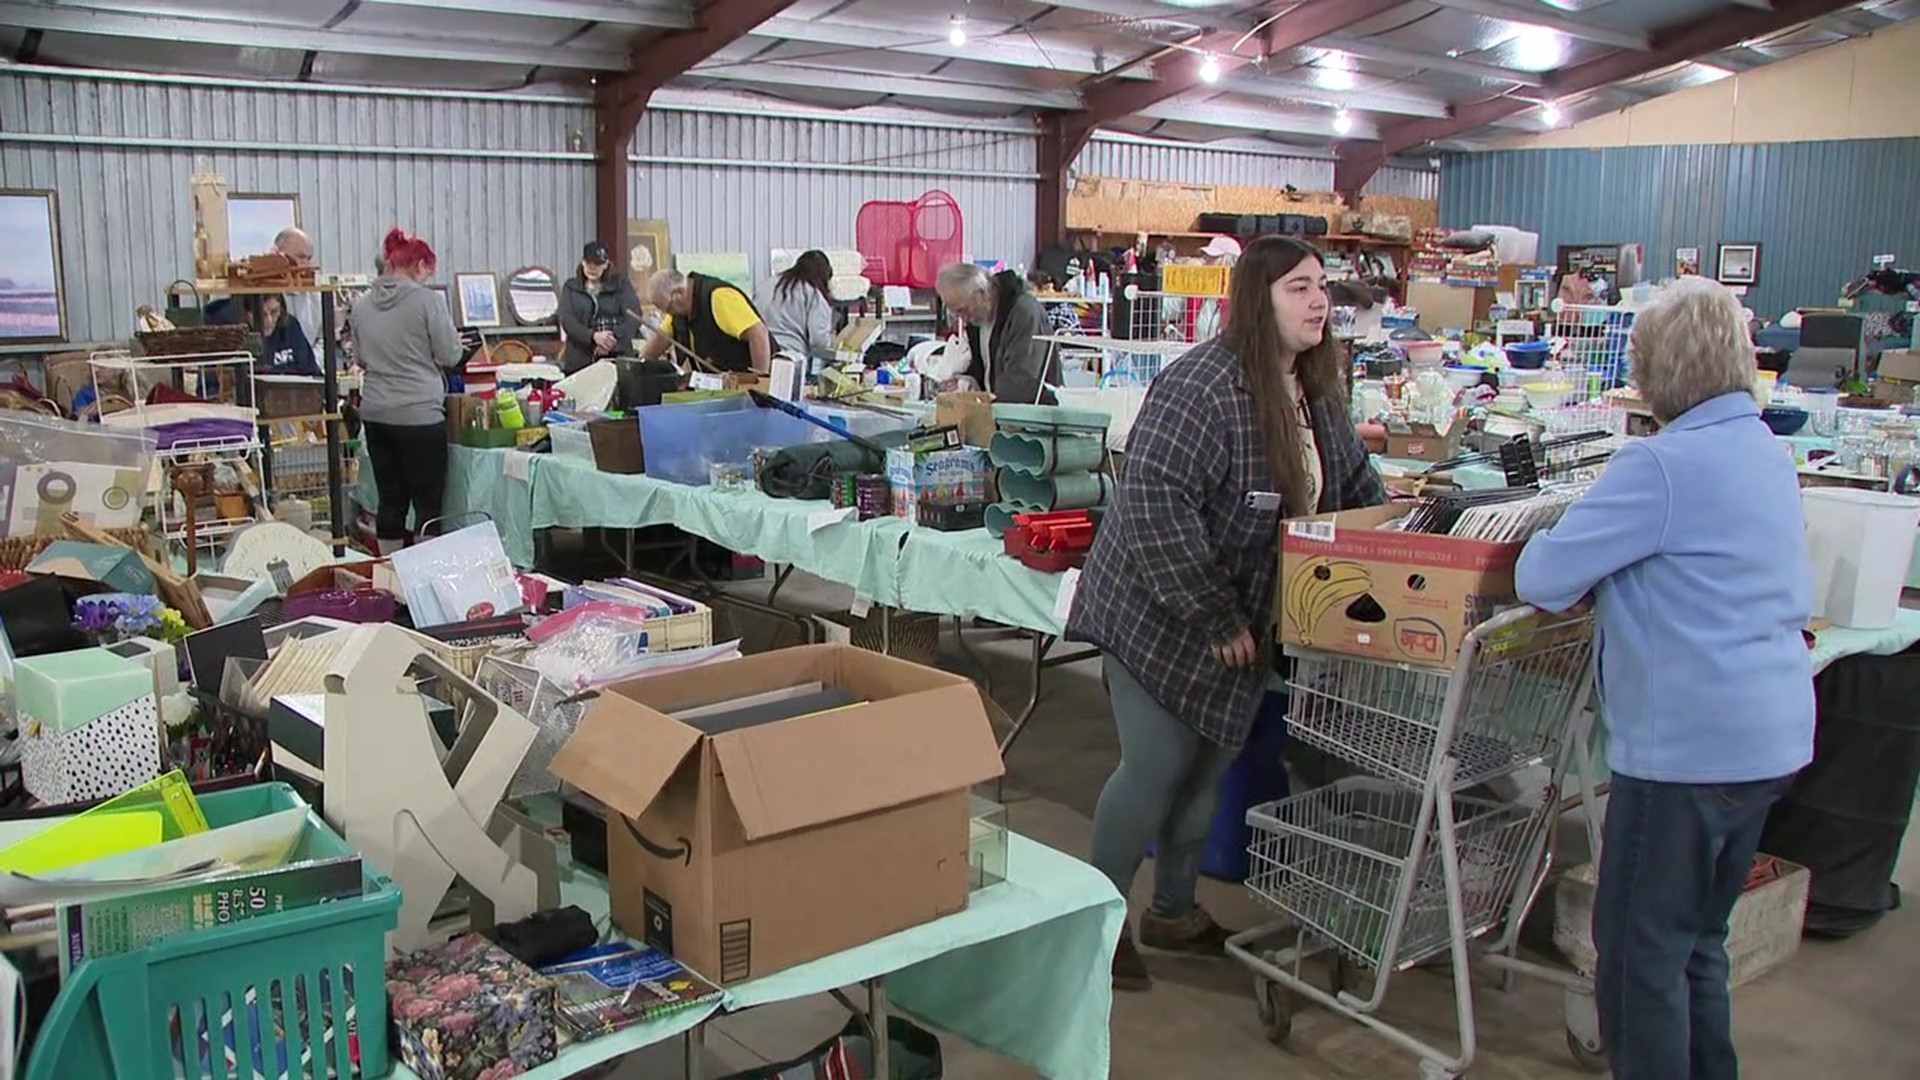 If you like yard sales, you might want to head to Columbia County. There's a big one, and all proceeds go to a no-kill animal shelter.